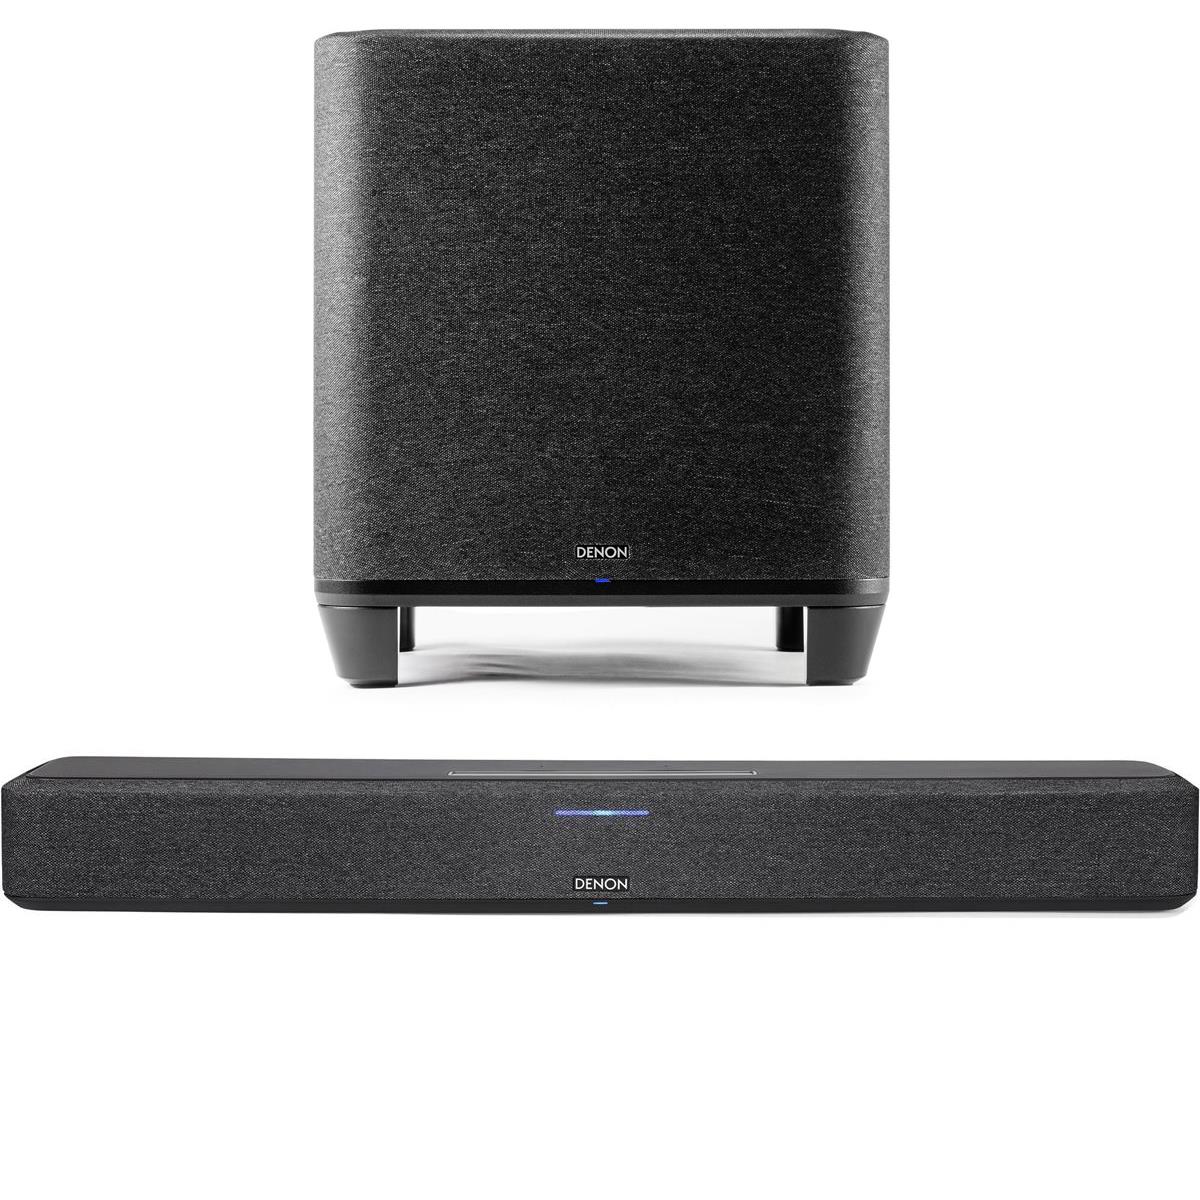 Image of Denon SB550 4-Channel Home Sound Bar with Subwoofer